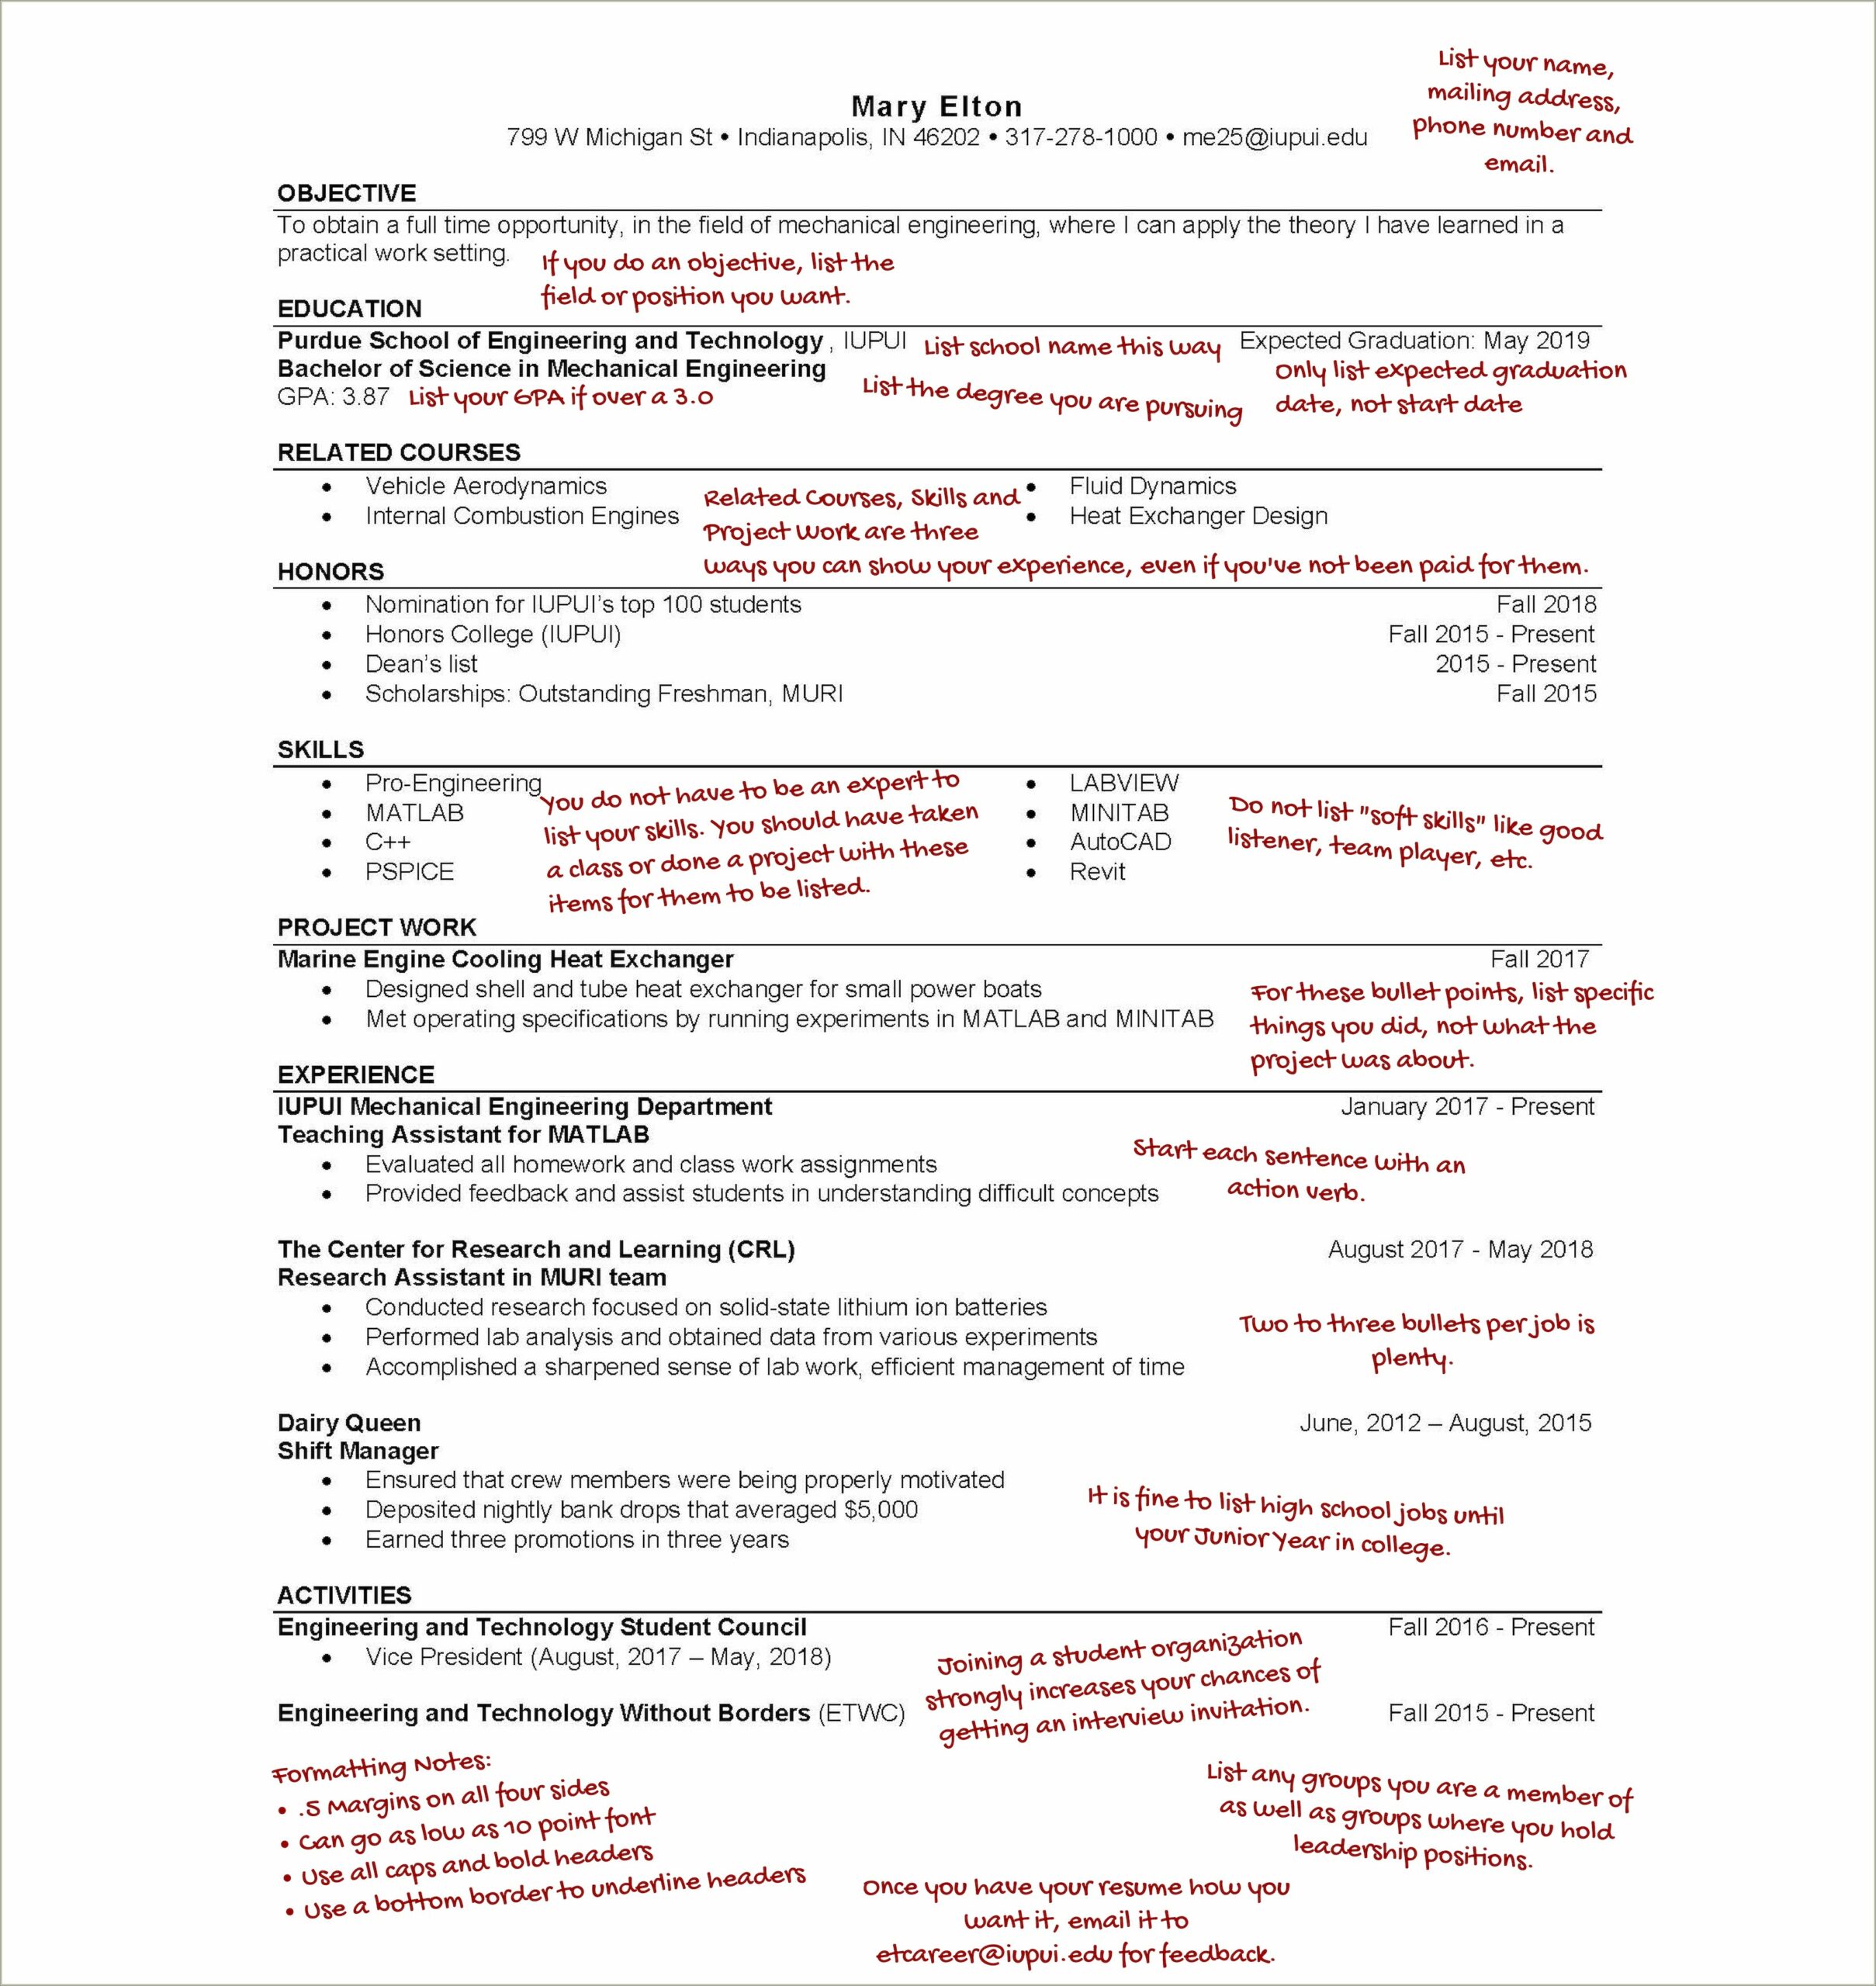 Sample Resume For Academic For Mechanical Engineering Chair